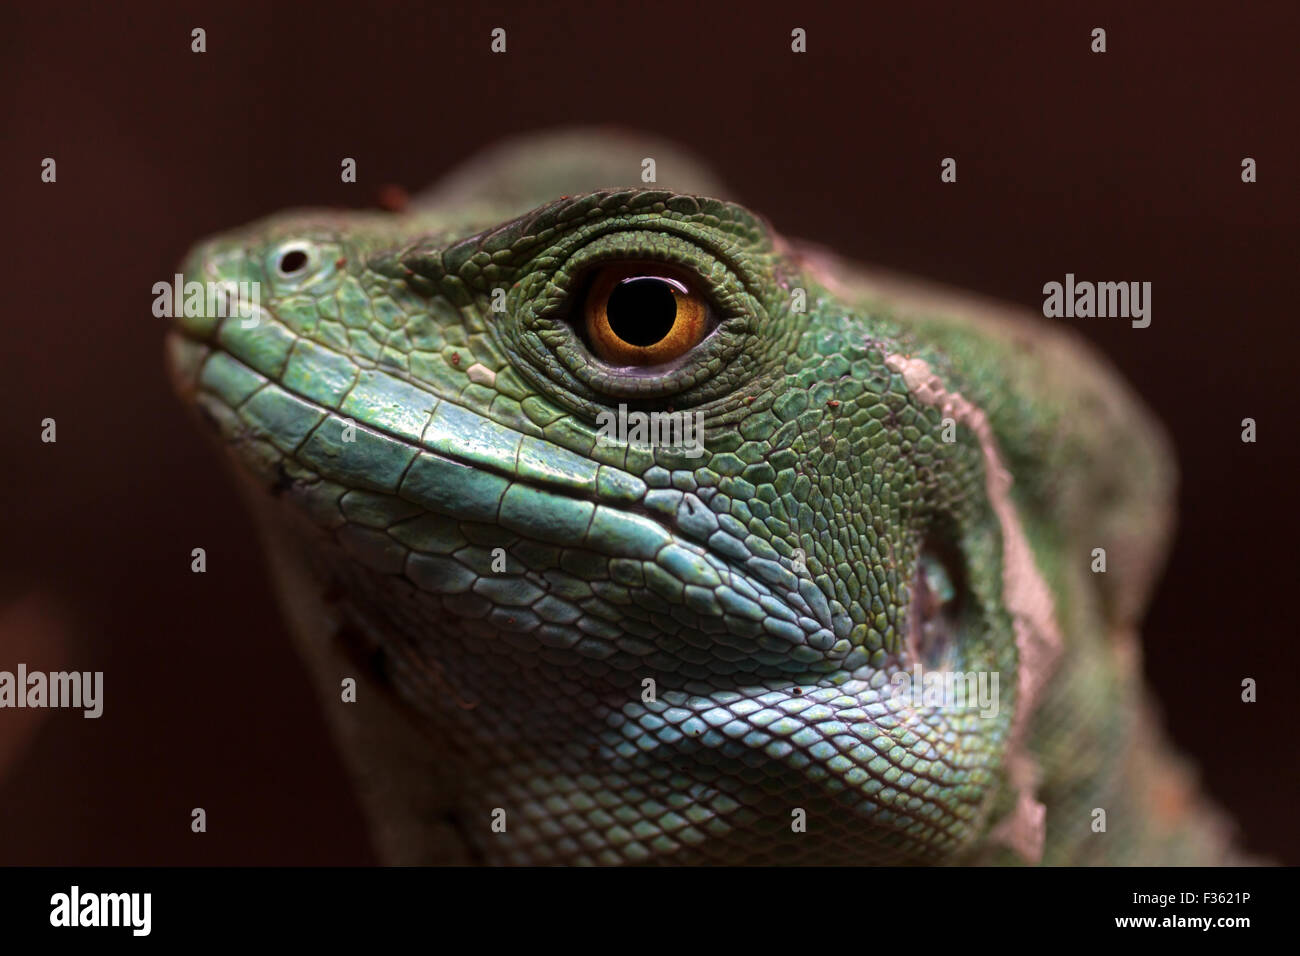 Close-up view of the head of a Female Plumed Basilisk lizard in Wingham Wildlife Park Stock Photo